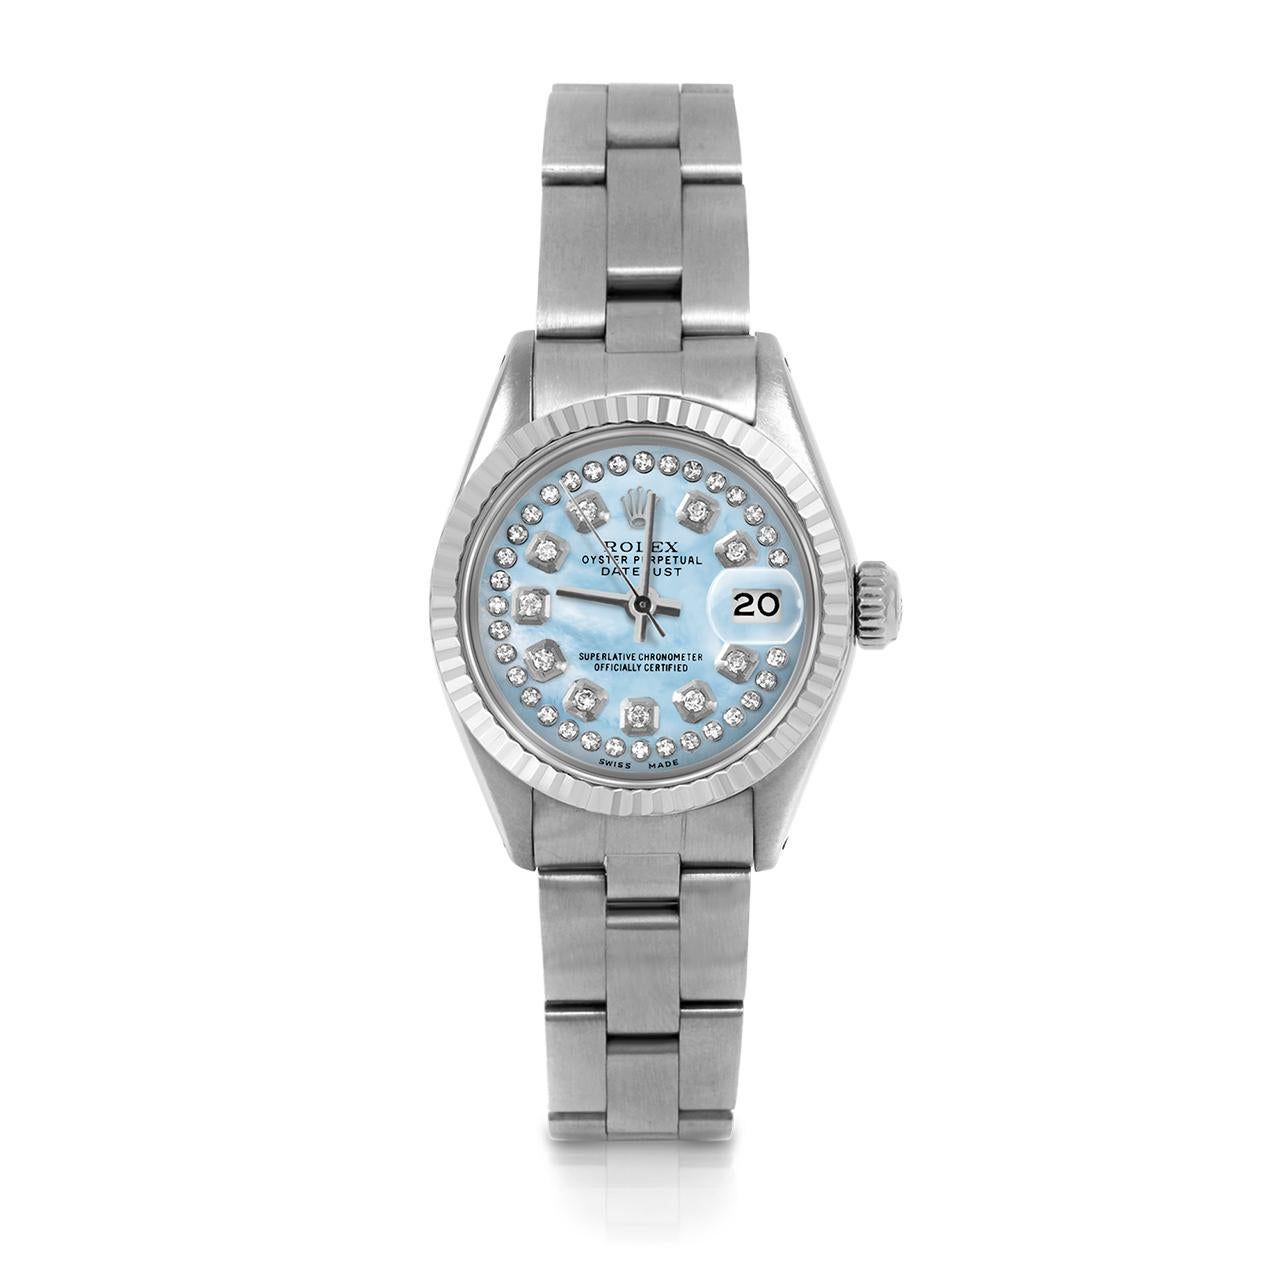 Pre-Owned Rolex 6917 Ladies 26mm Datejust Watch, Custom Light Blue Mother of Pearl String Diamond Dial & Fluted Bezel on Rolex Stainless Steel Oyster Band.   

SKU 6917-SS-LBMOP-STRD-FLT-OYS


Brand/Model:        Rolex Datejust
Model Number:       